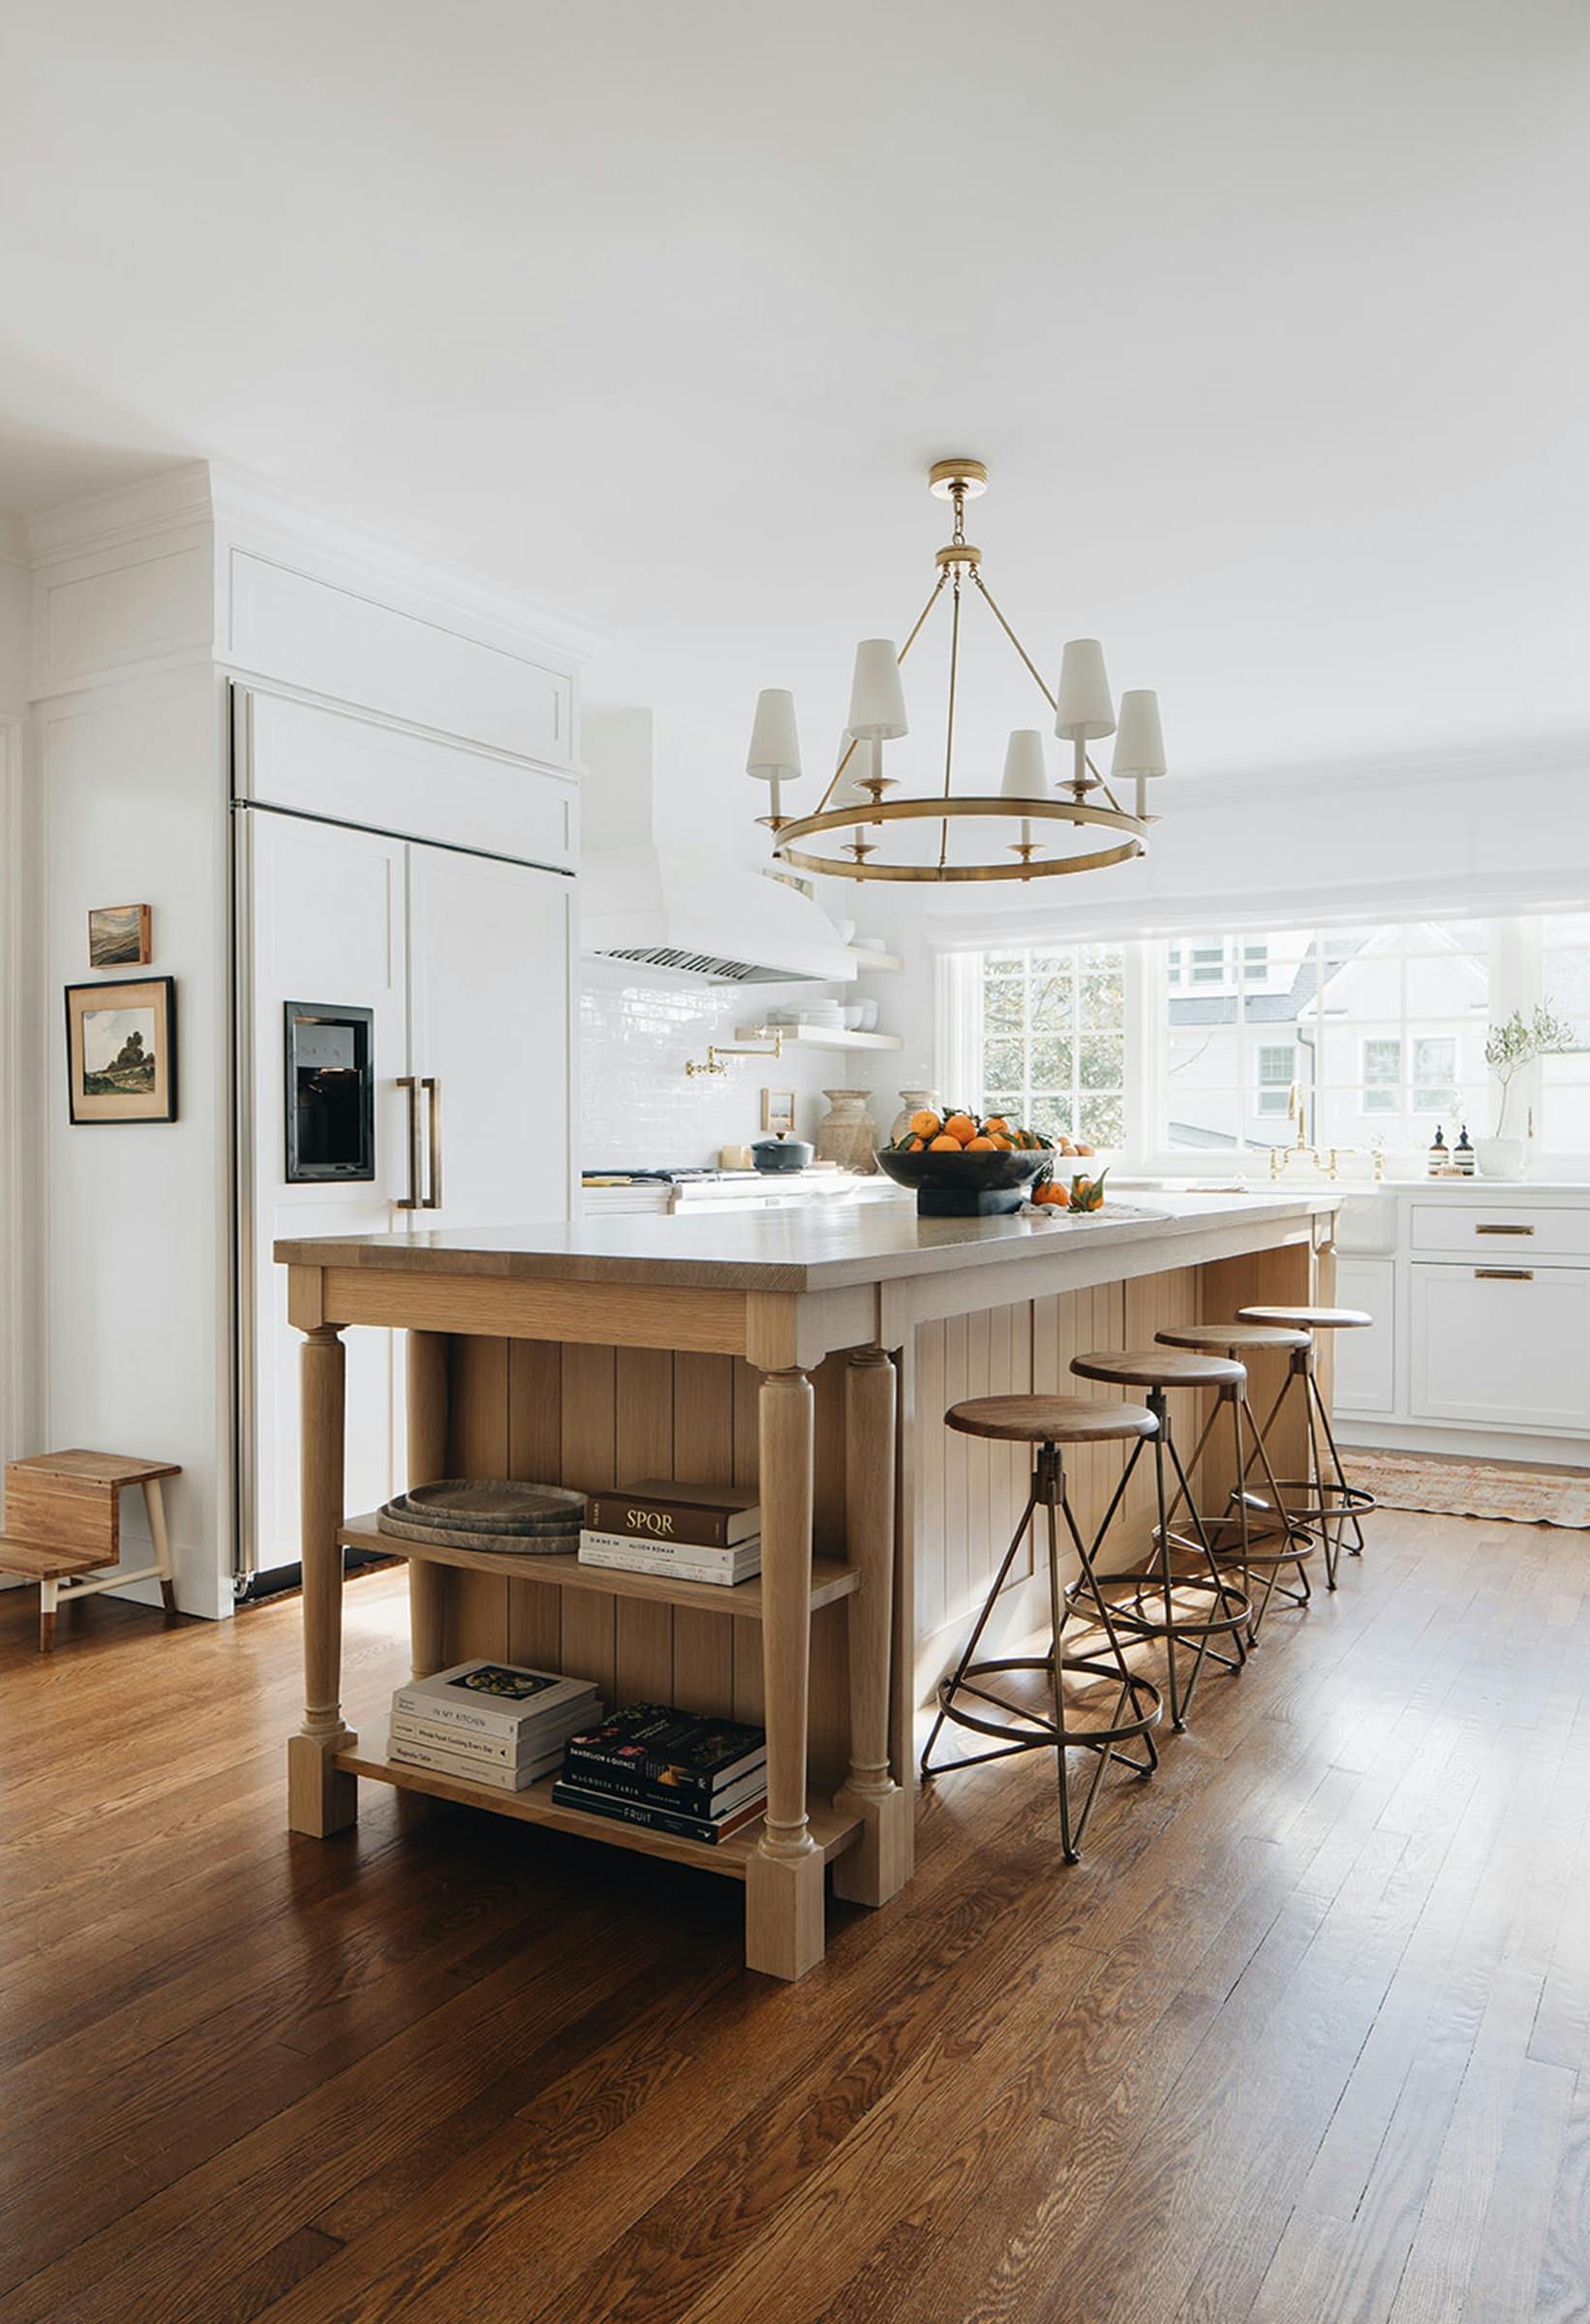 Nicole-Green-Design-Project-Chevy-Chase-Historic-East-Coast-Home-Kitchen-1